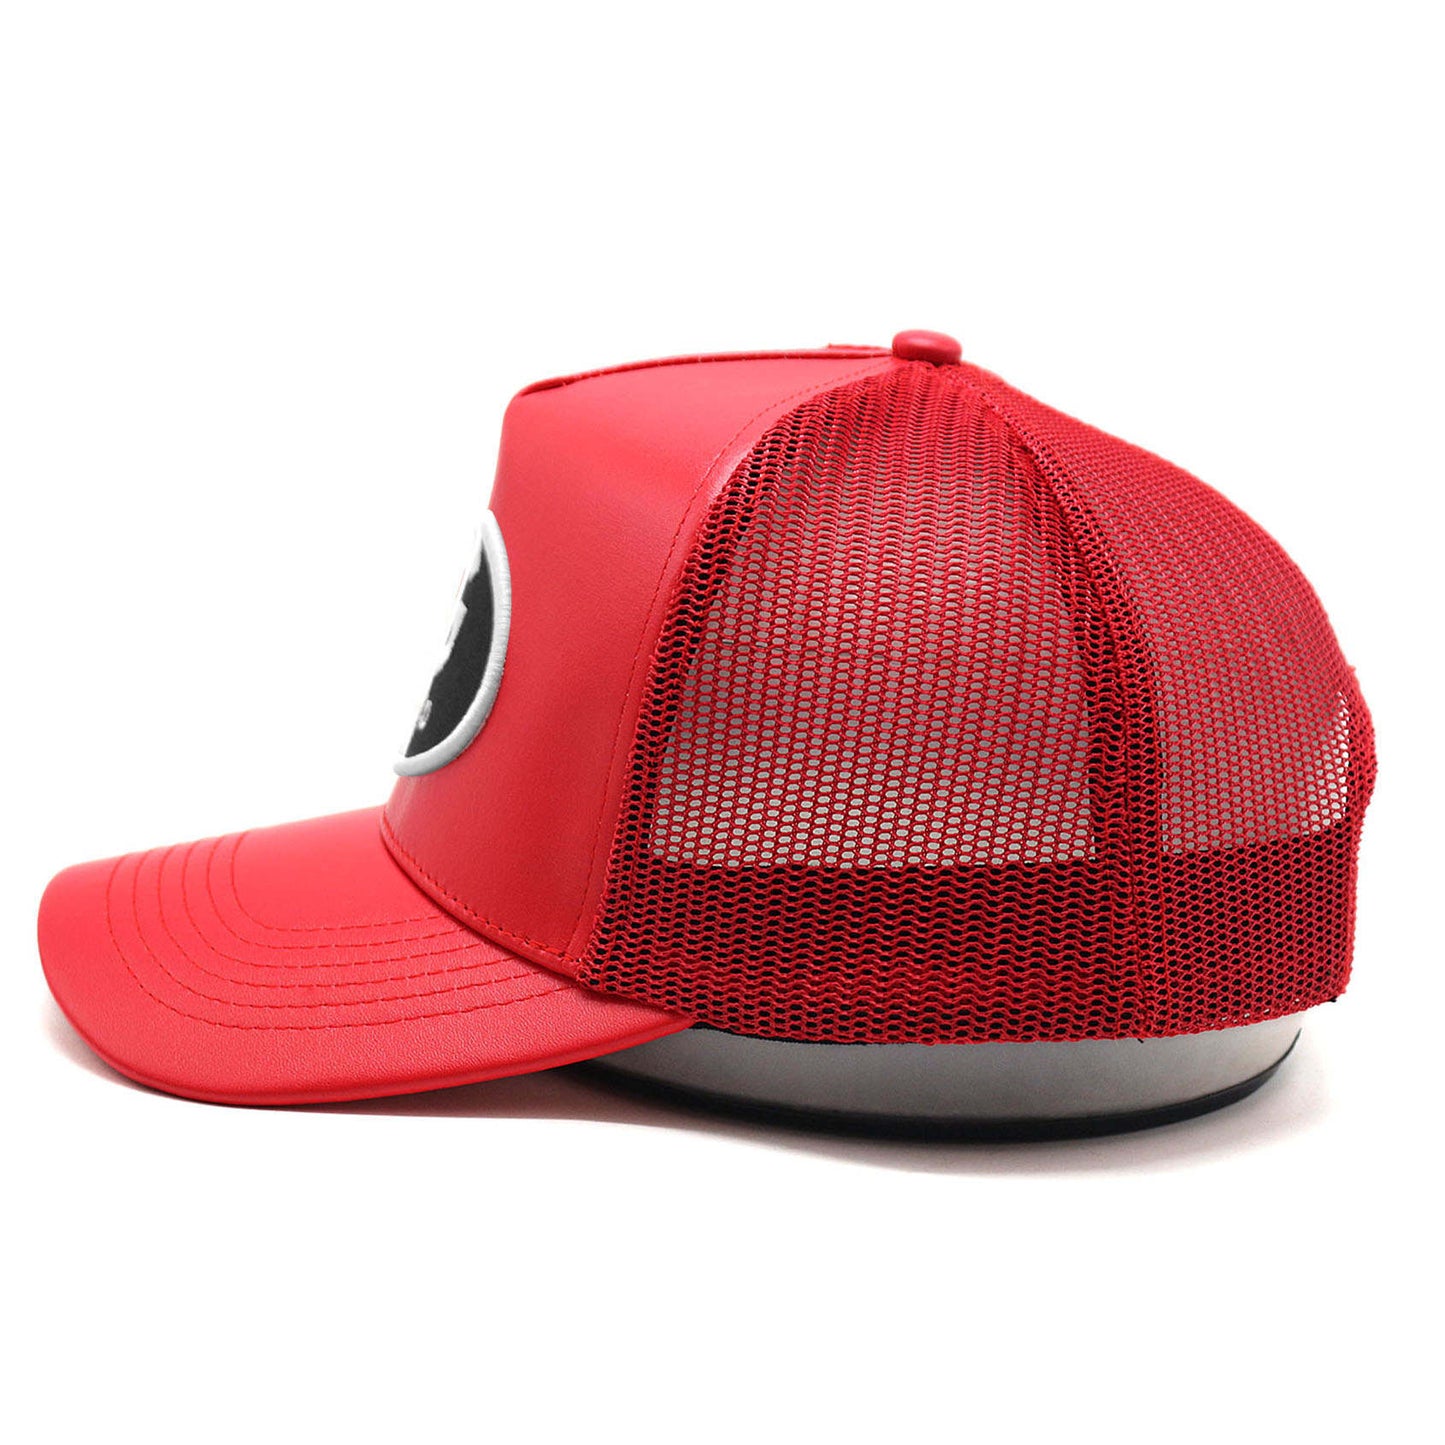 Gifted Gods Leather Trucker Hat (Red)